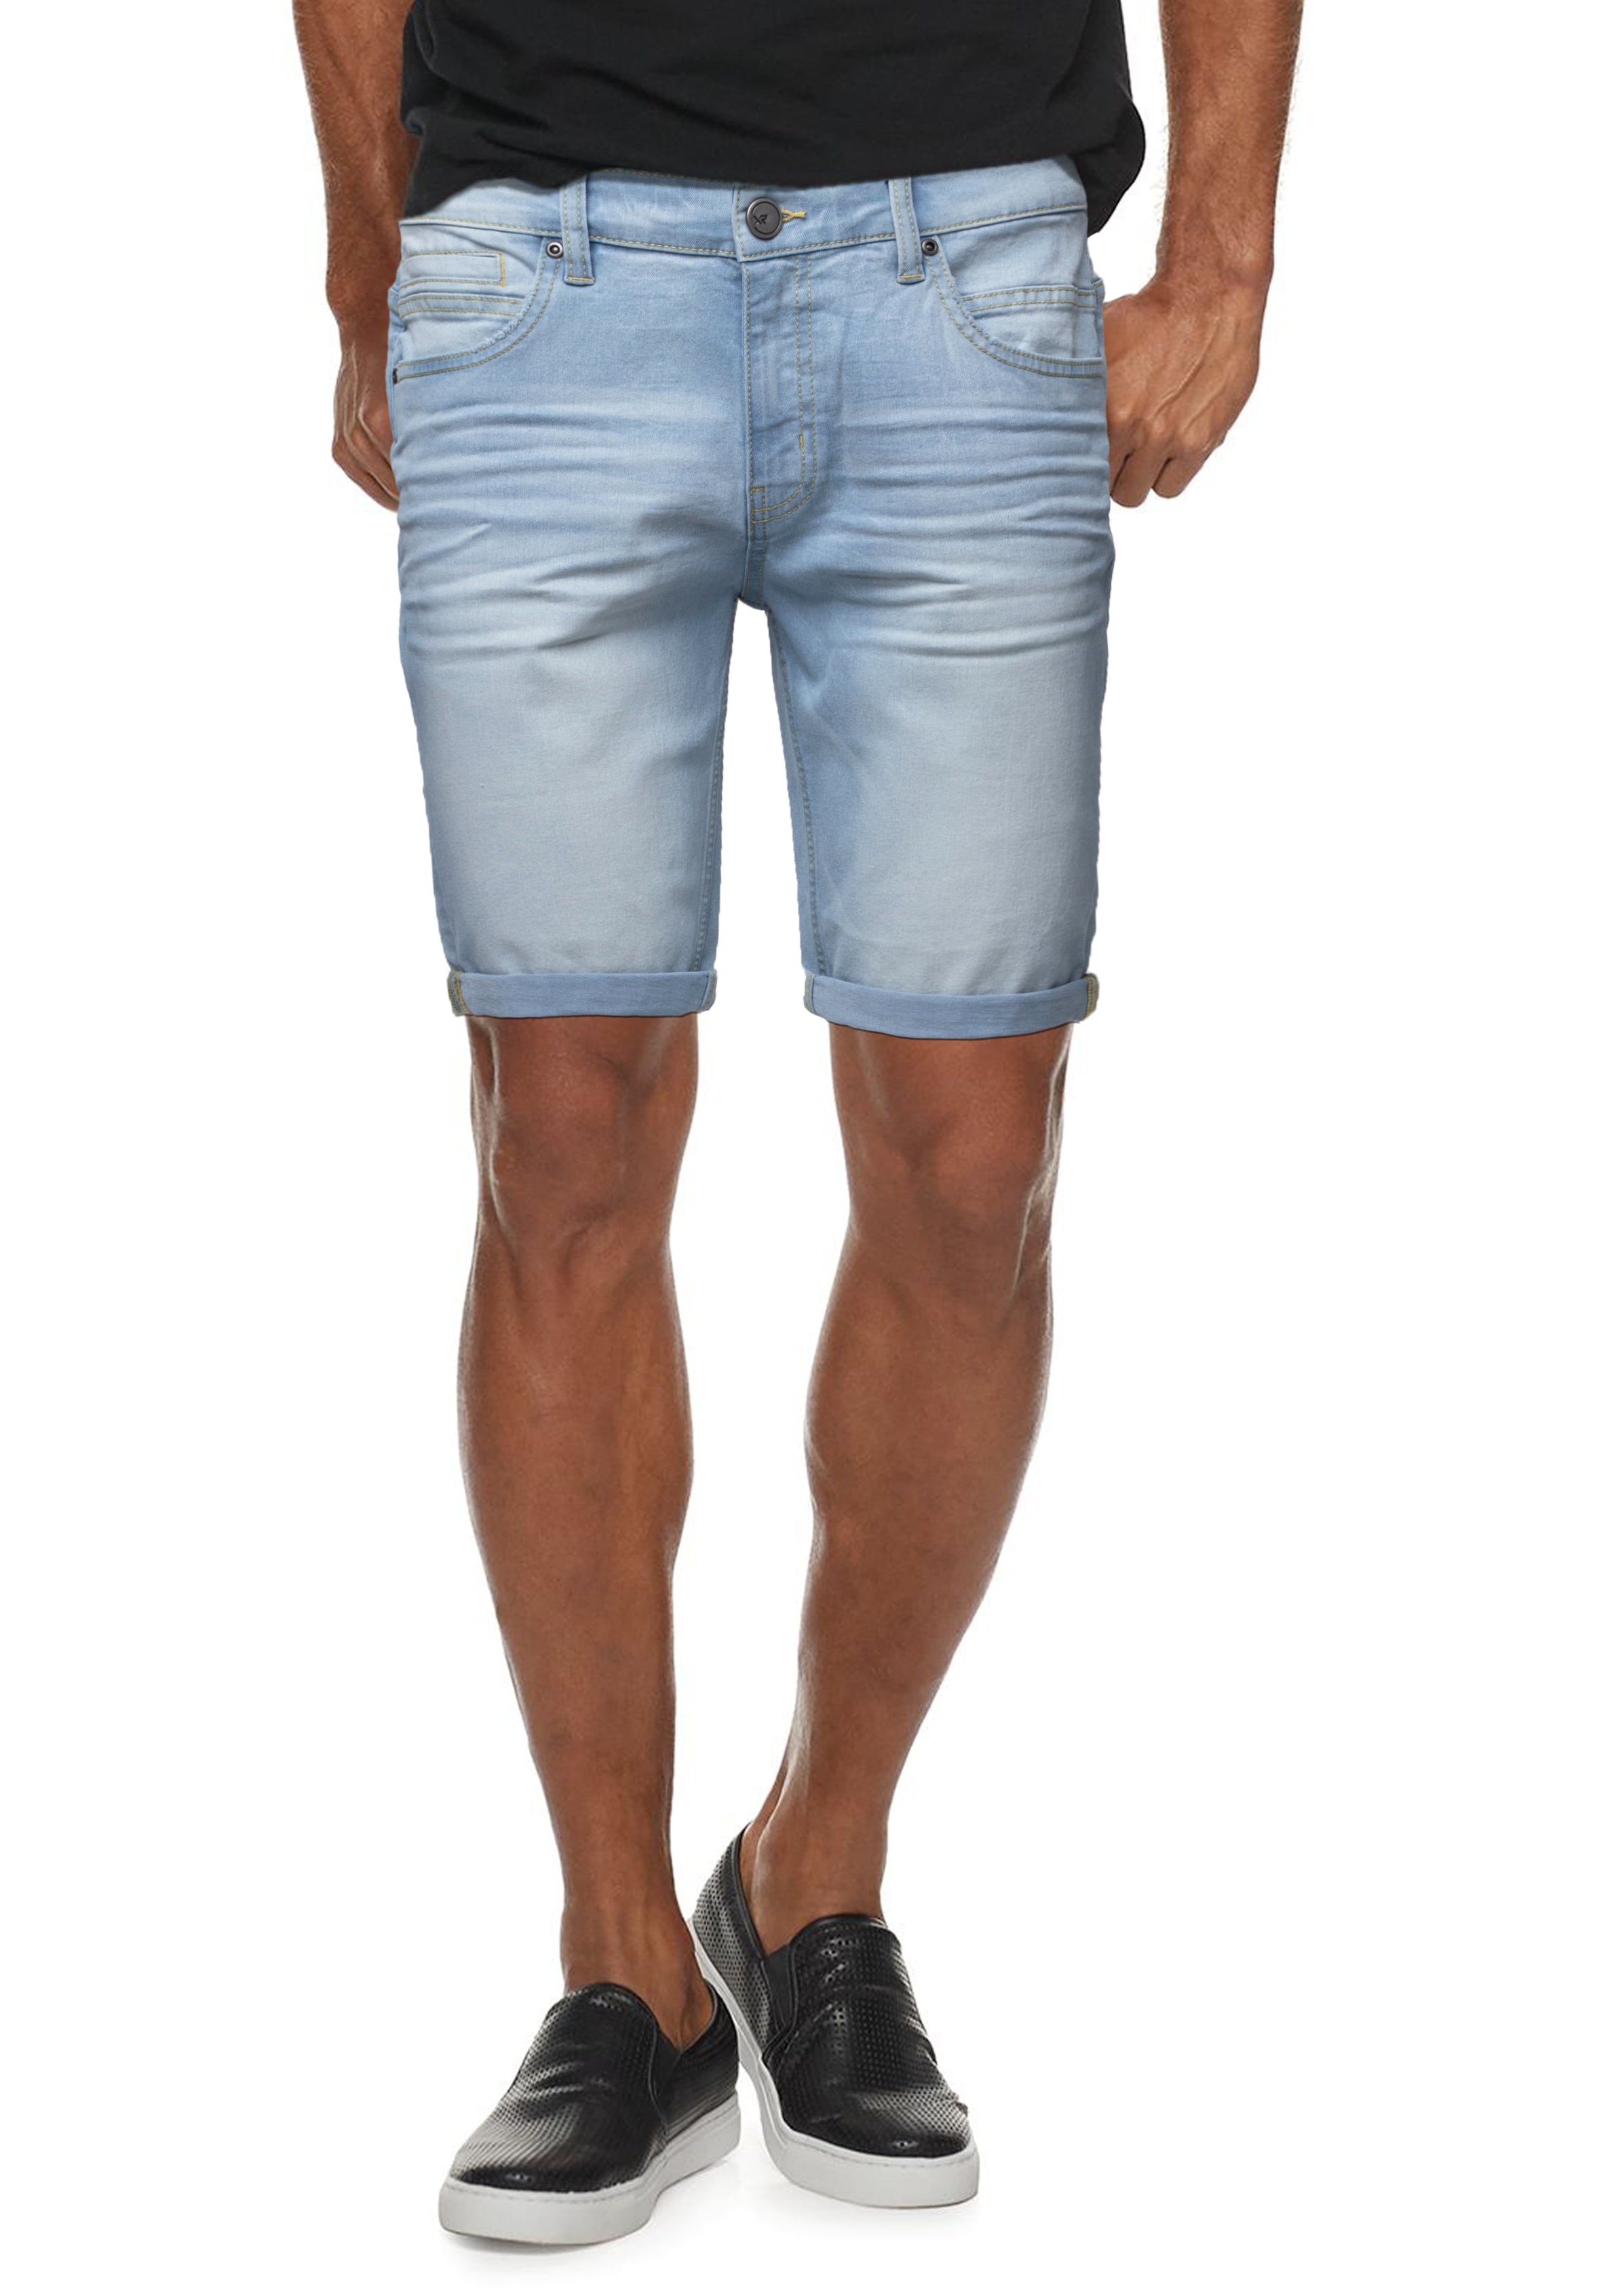 Men's Stretch Casual Denim Shorts Slim Fit Rolled Up Cuff Bermuda Short X RAY Slim Jean Shorts for Men Distressed 